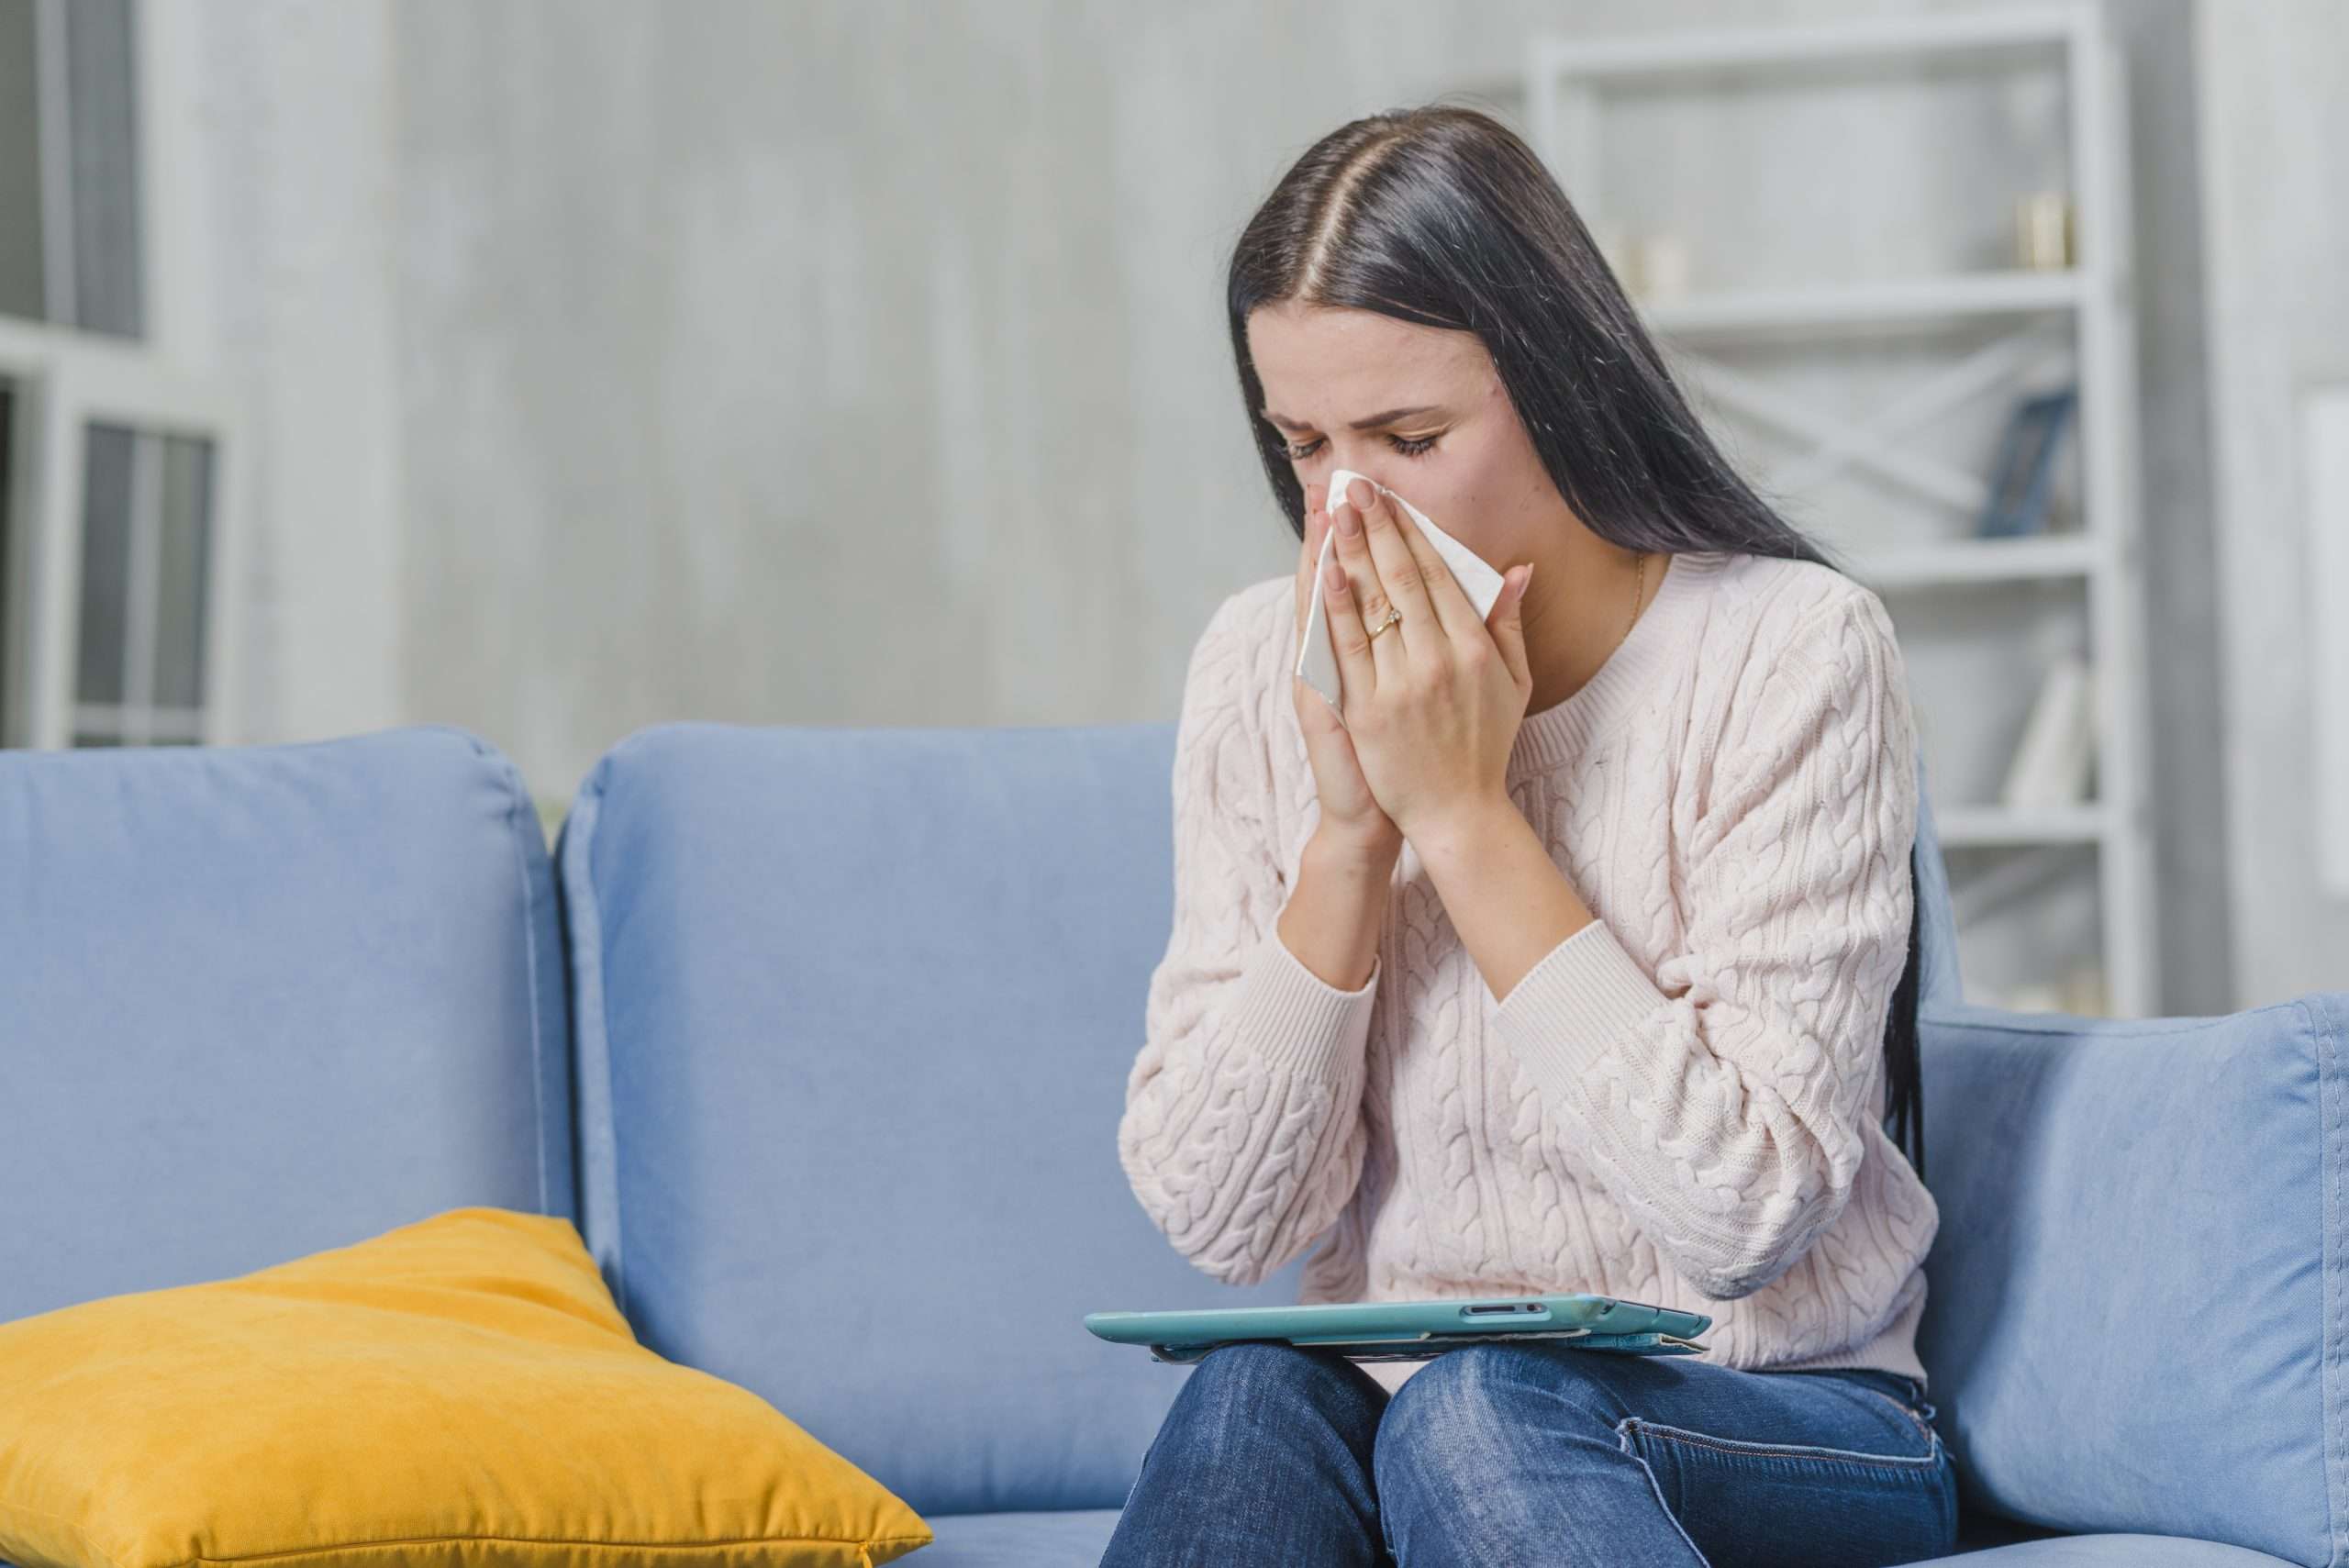 5 Easy Ways to Reduce Allergens in Your Home